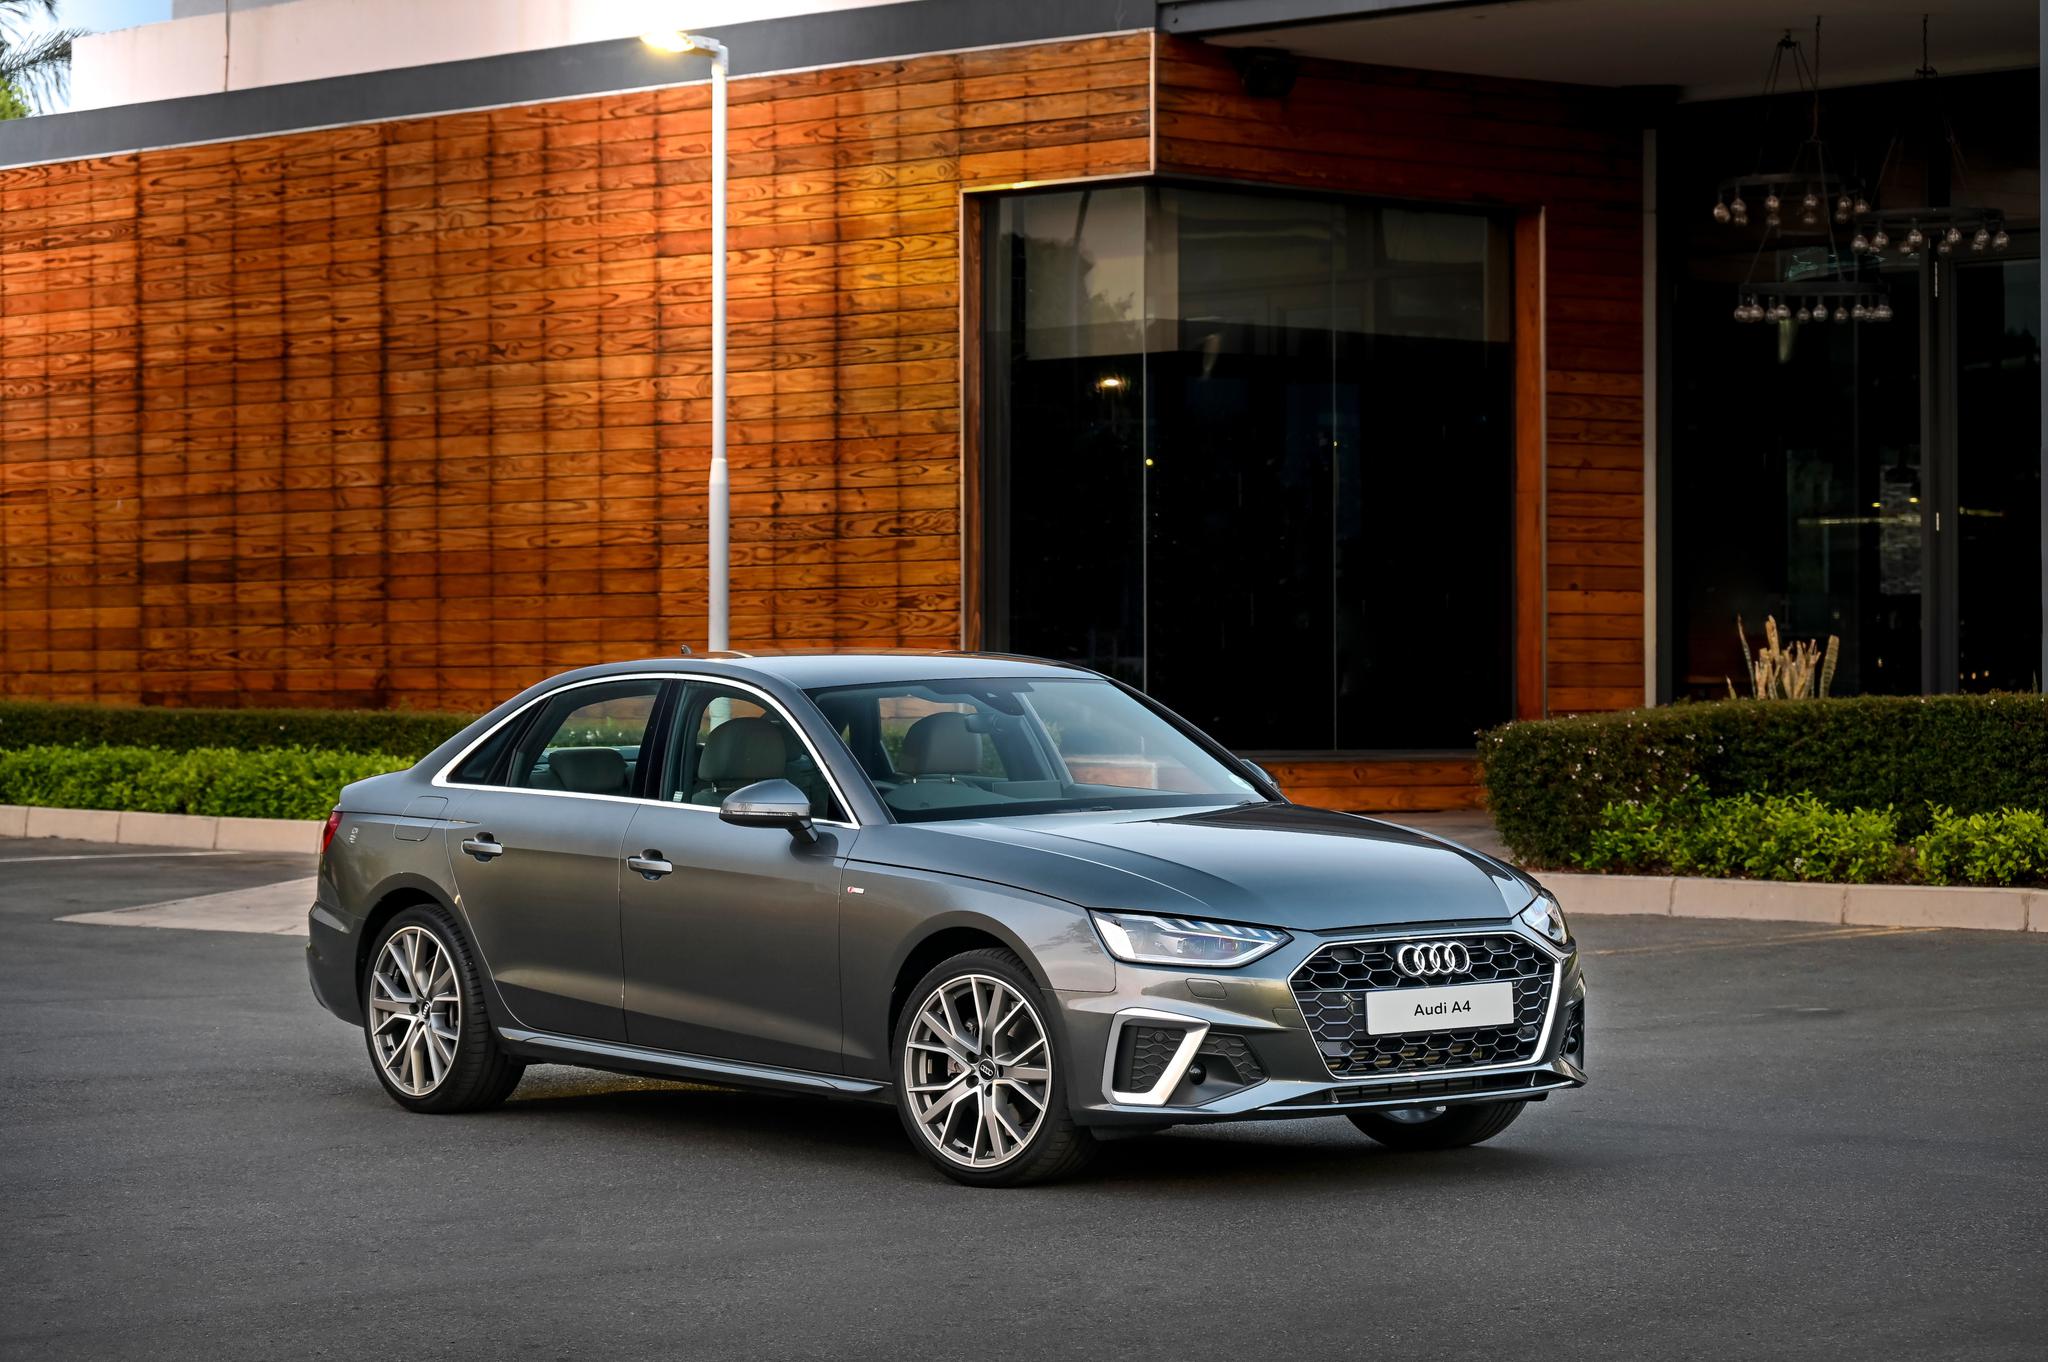 Refreshed Audi A4 lands in South Africa / KumbiM on Cars